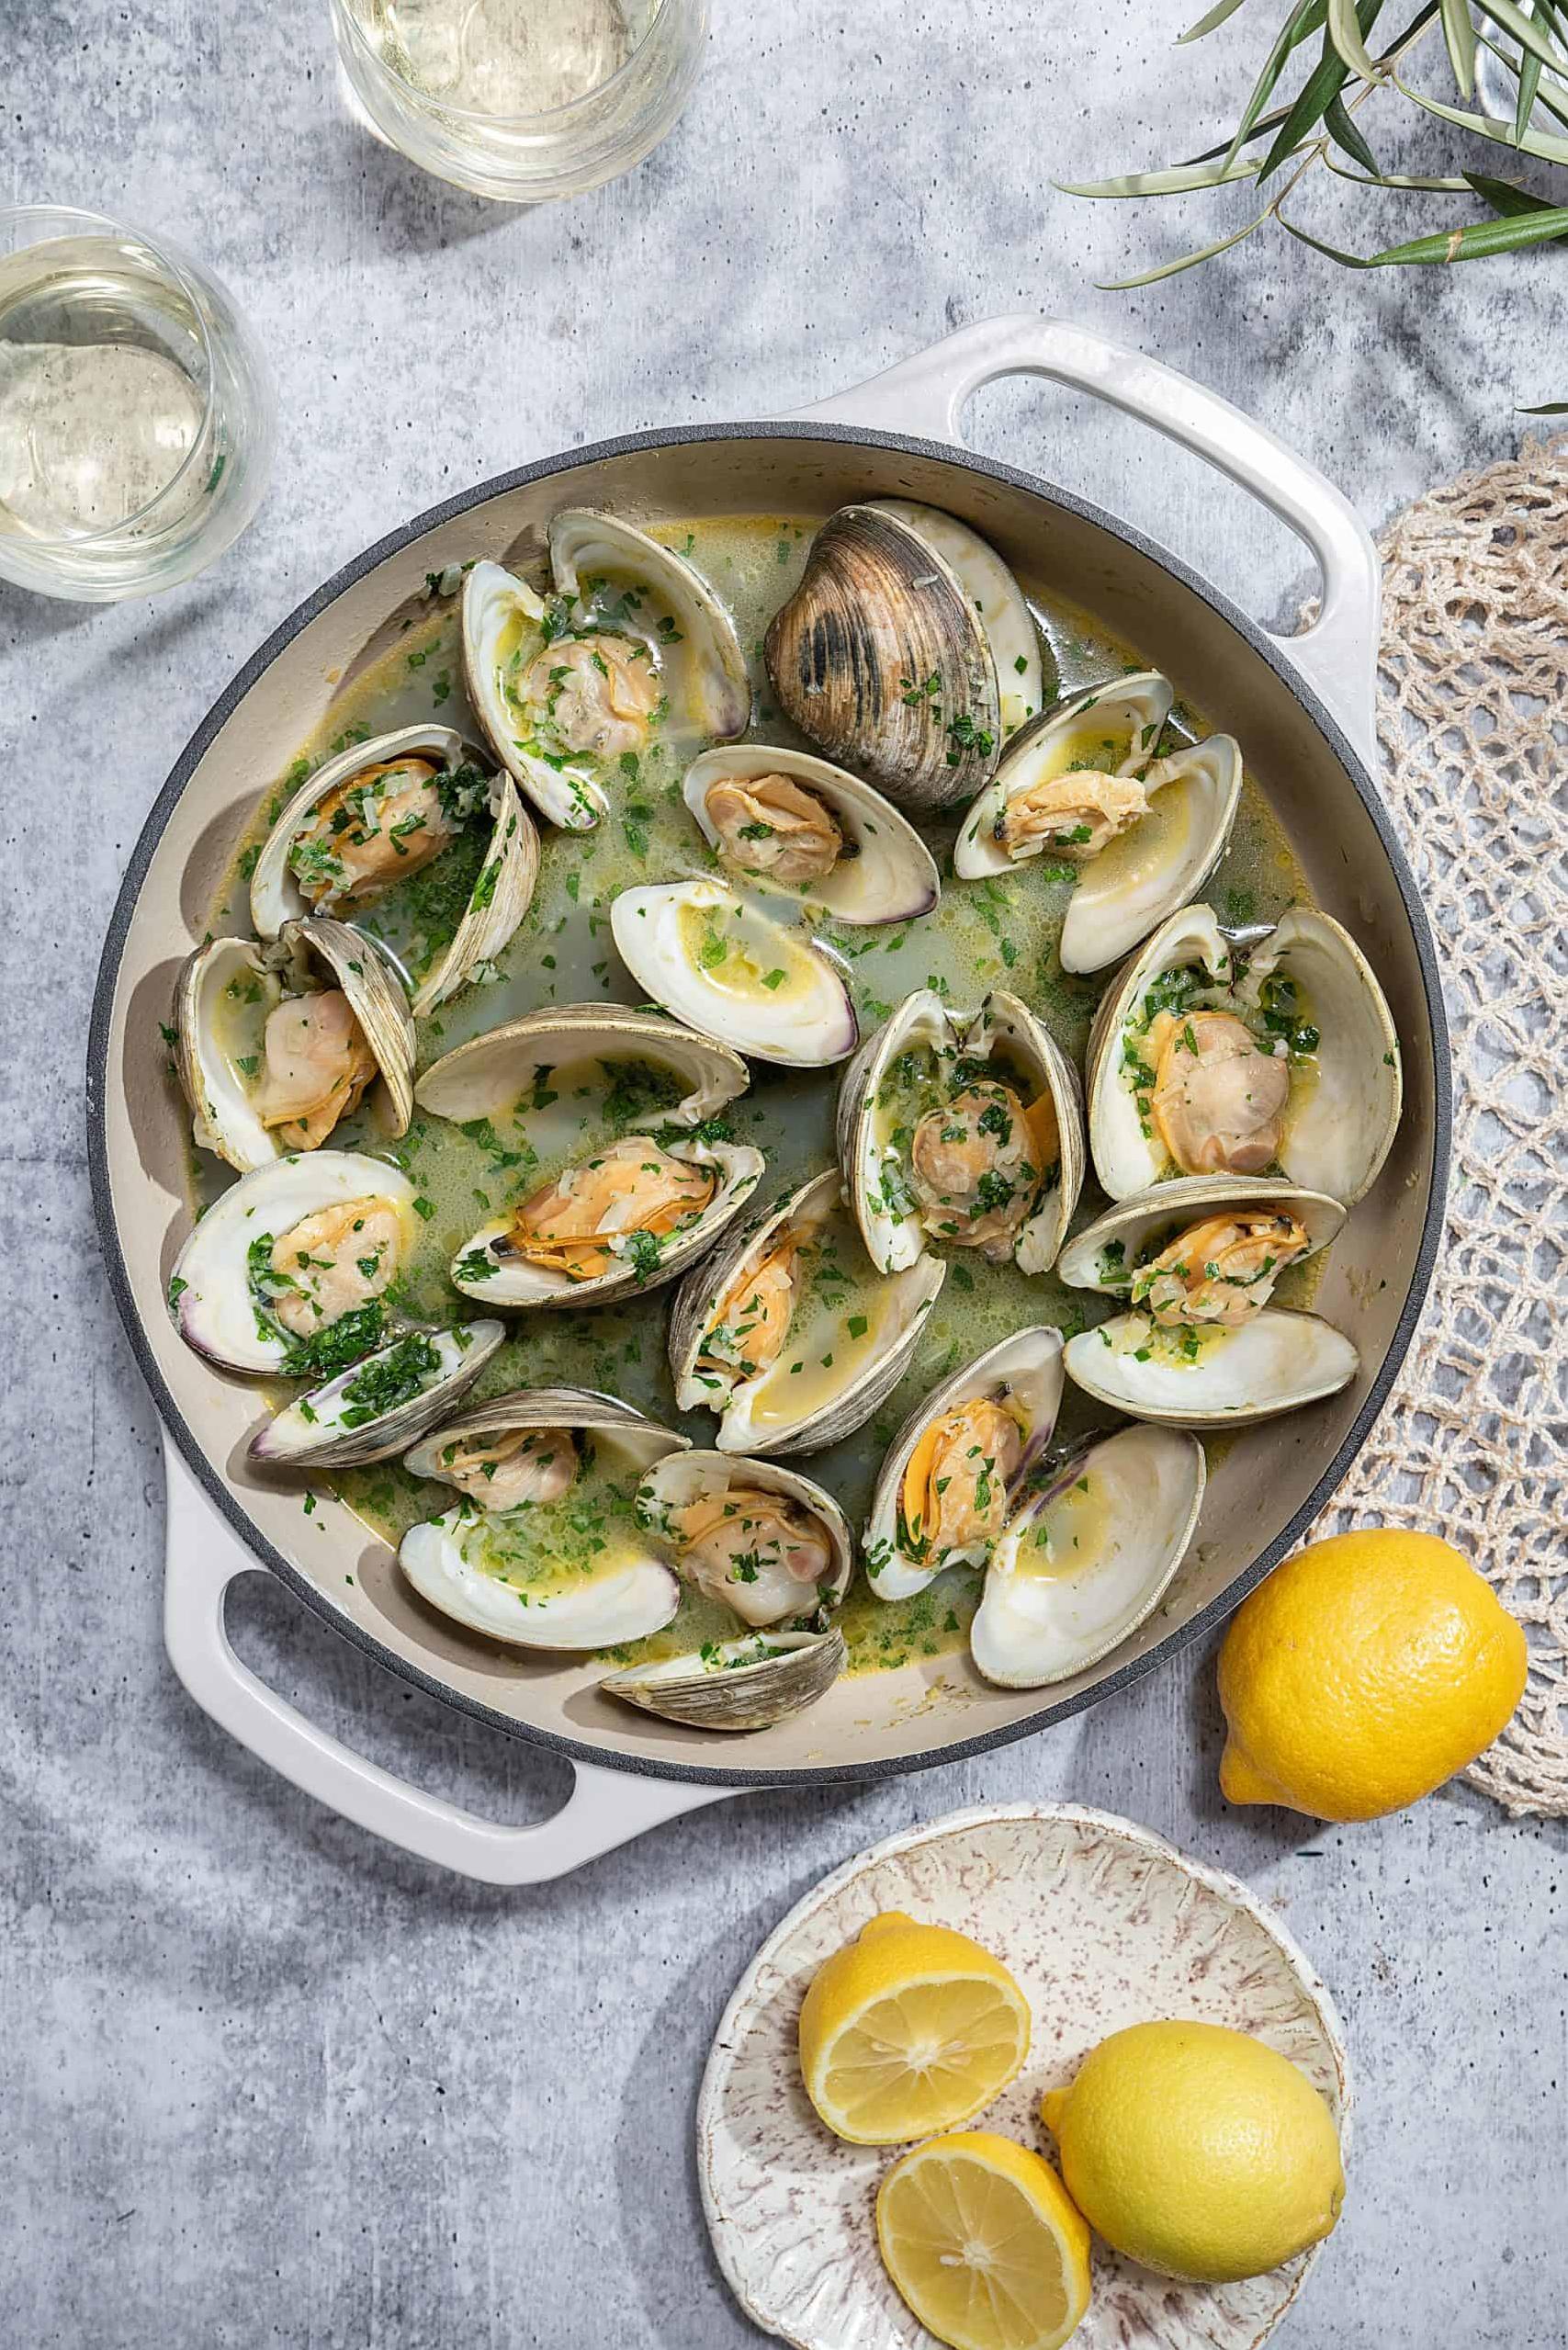  Few things are more satisfying than a bowl of fresh clams in a rich, aromatic broth.